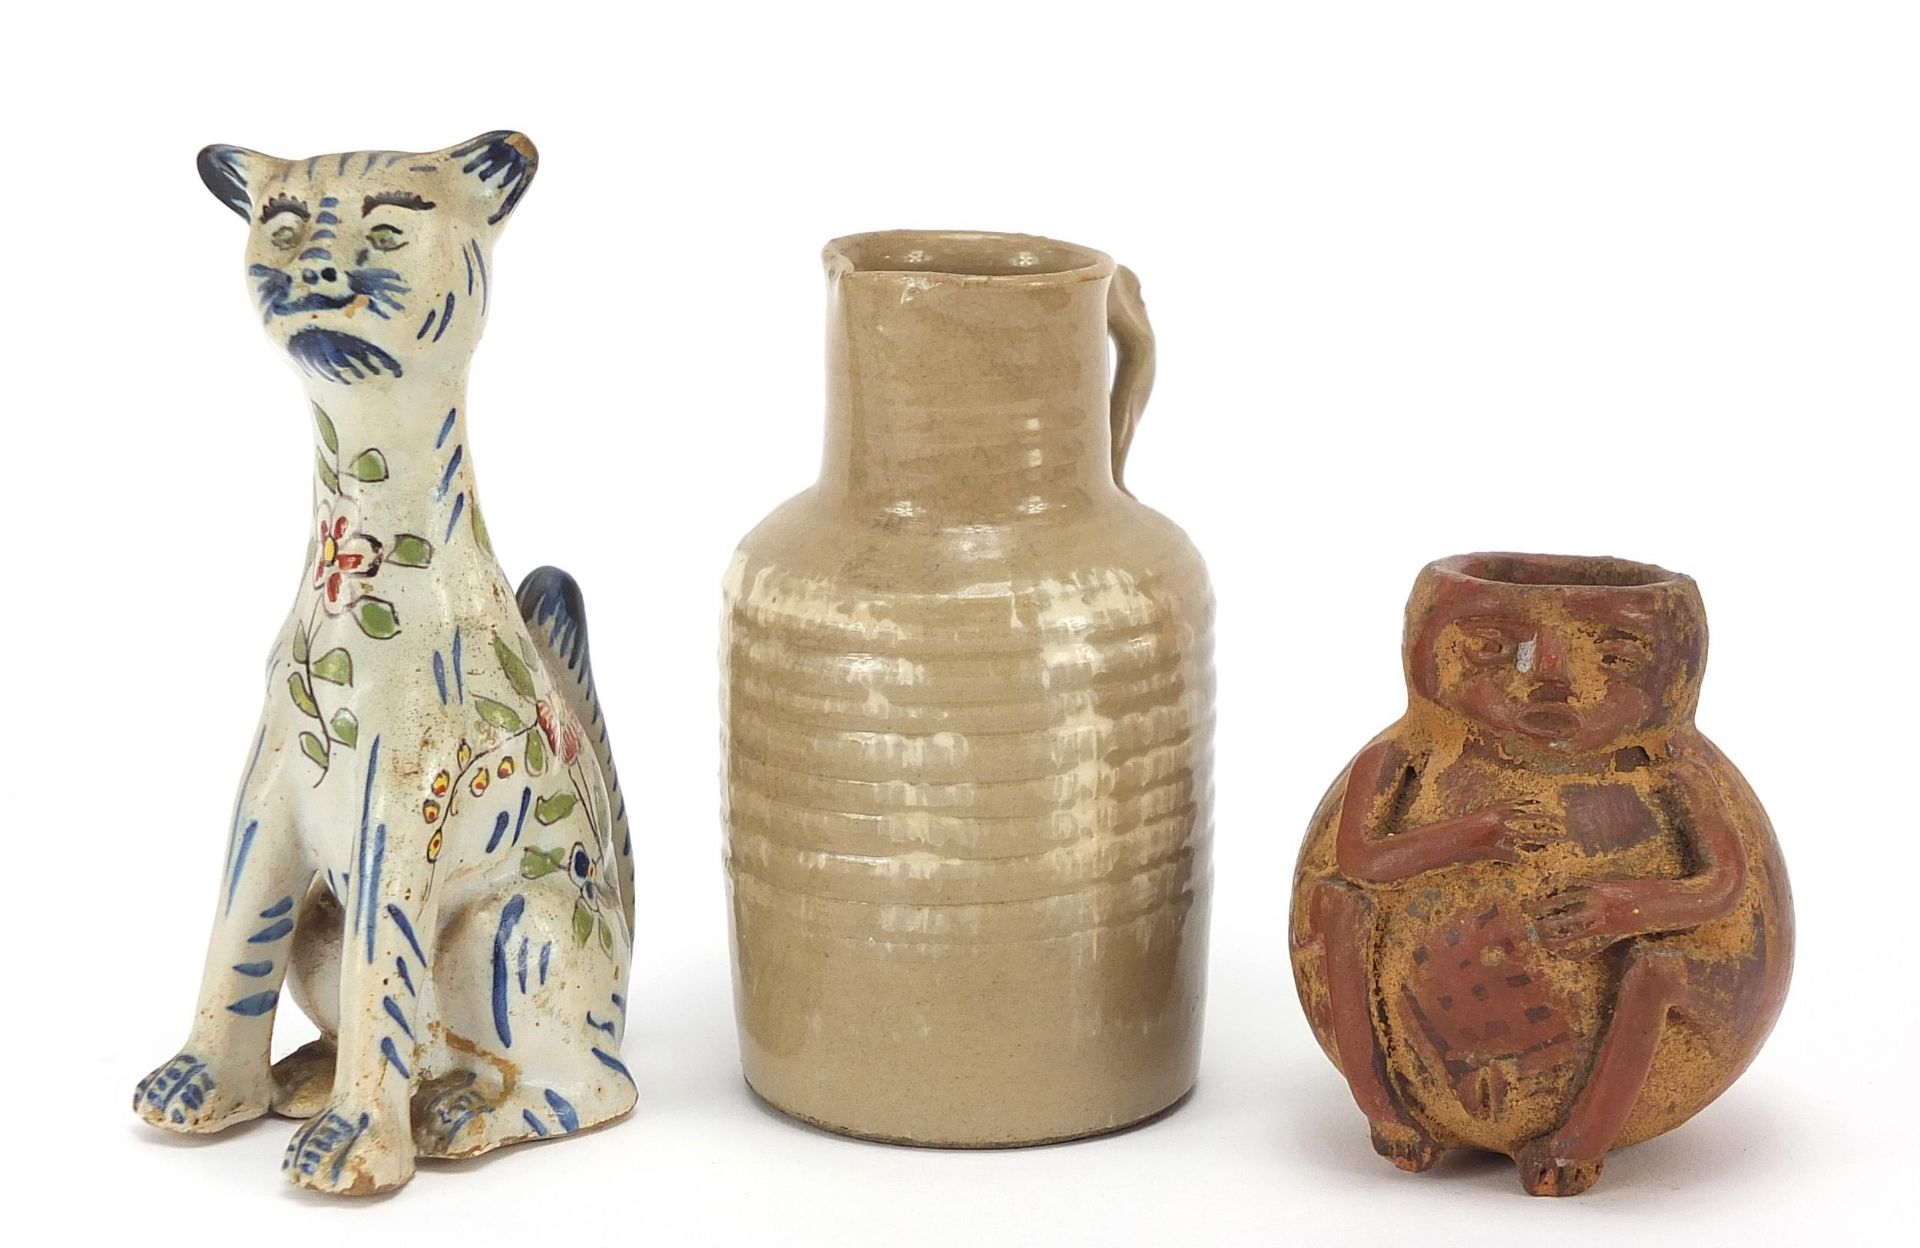 Pottery including a terracotta figural vase and Galle style faience glazed cat, the largest 12cm